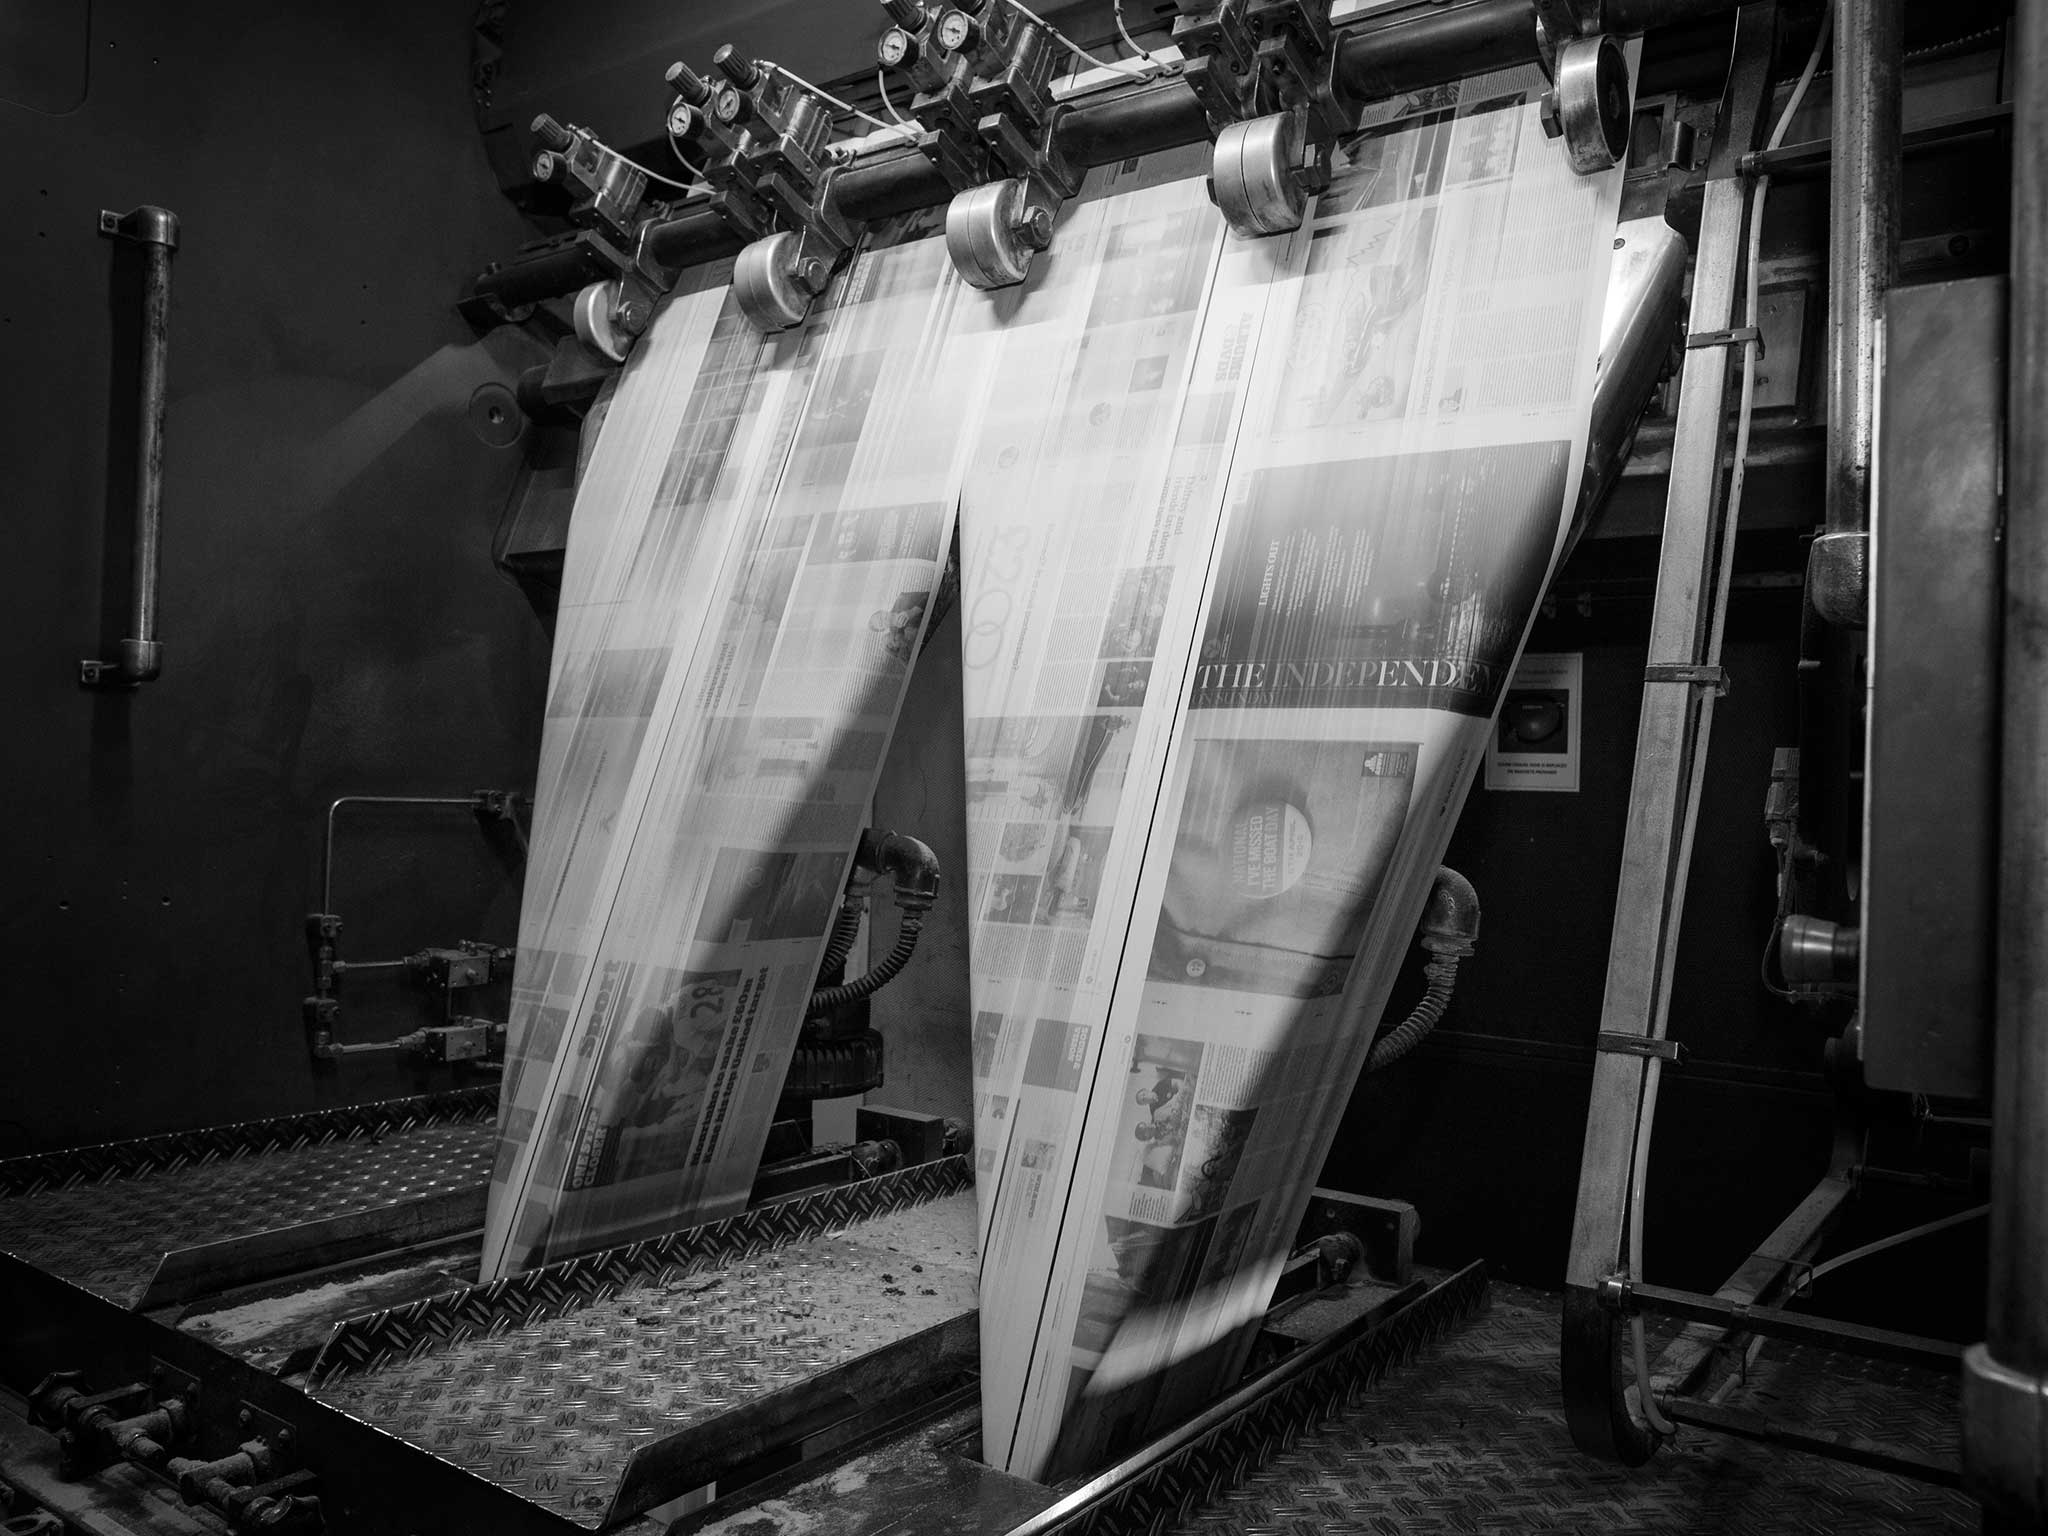 The presses on ‘The Independent’ and ‘Independent on Sunday’ have rolled for the last time at our print sites across the country